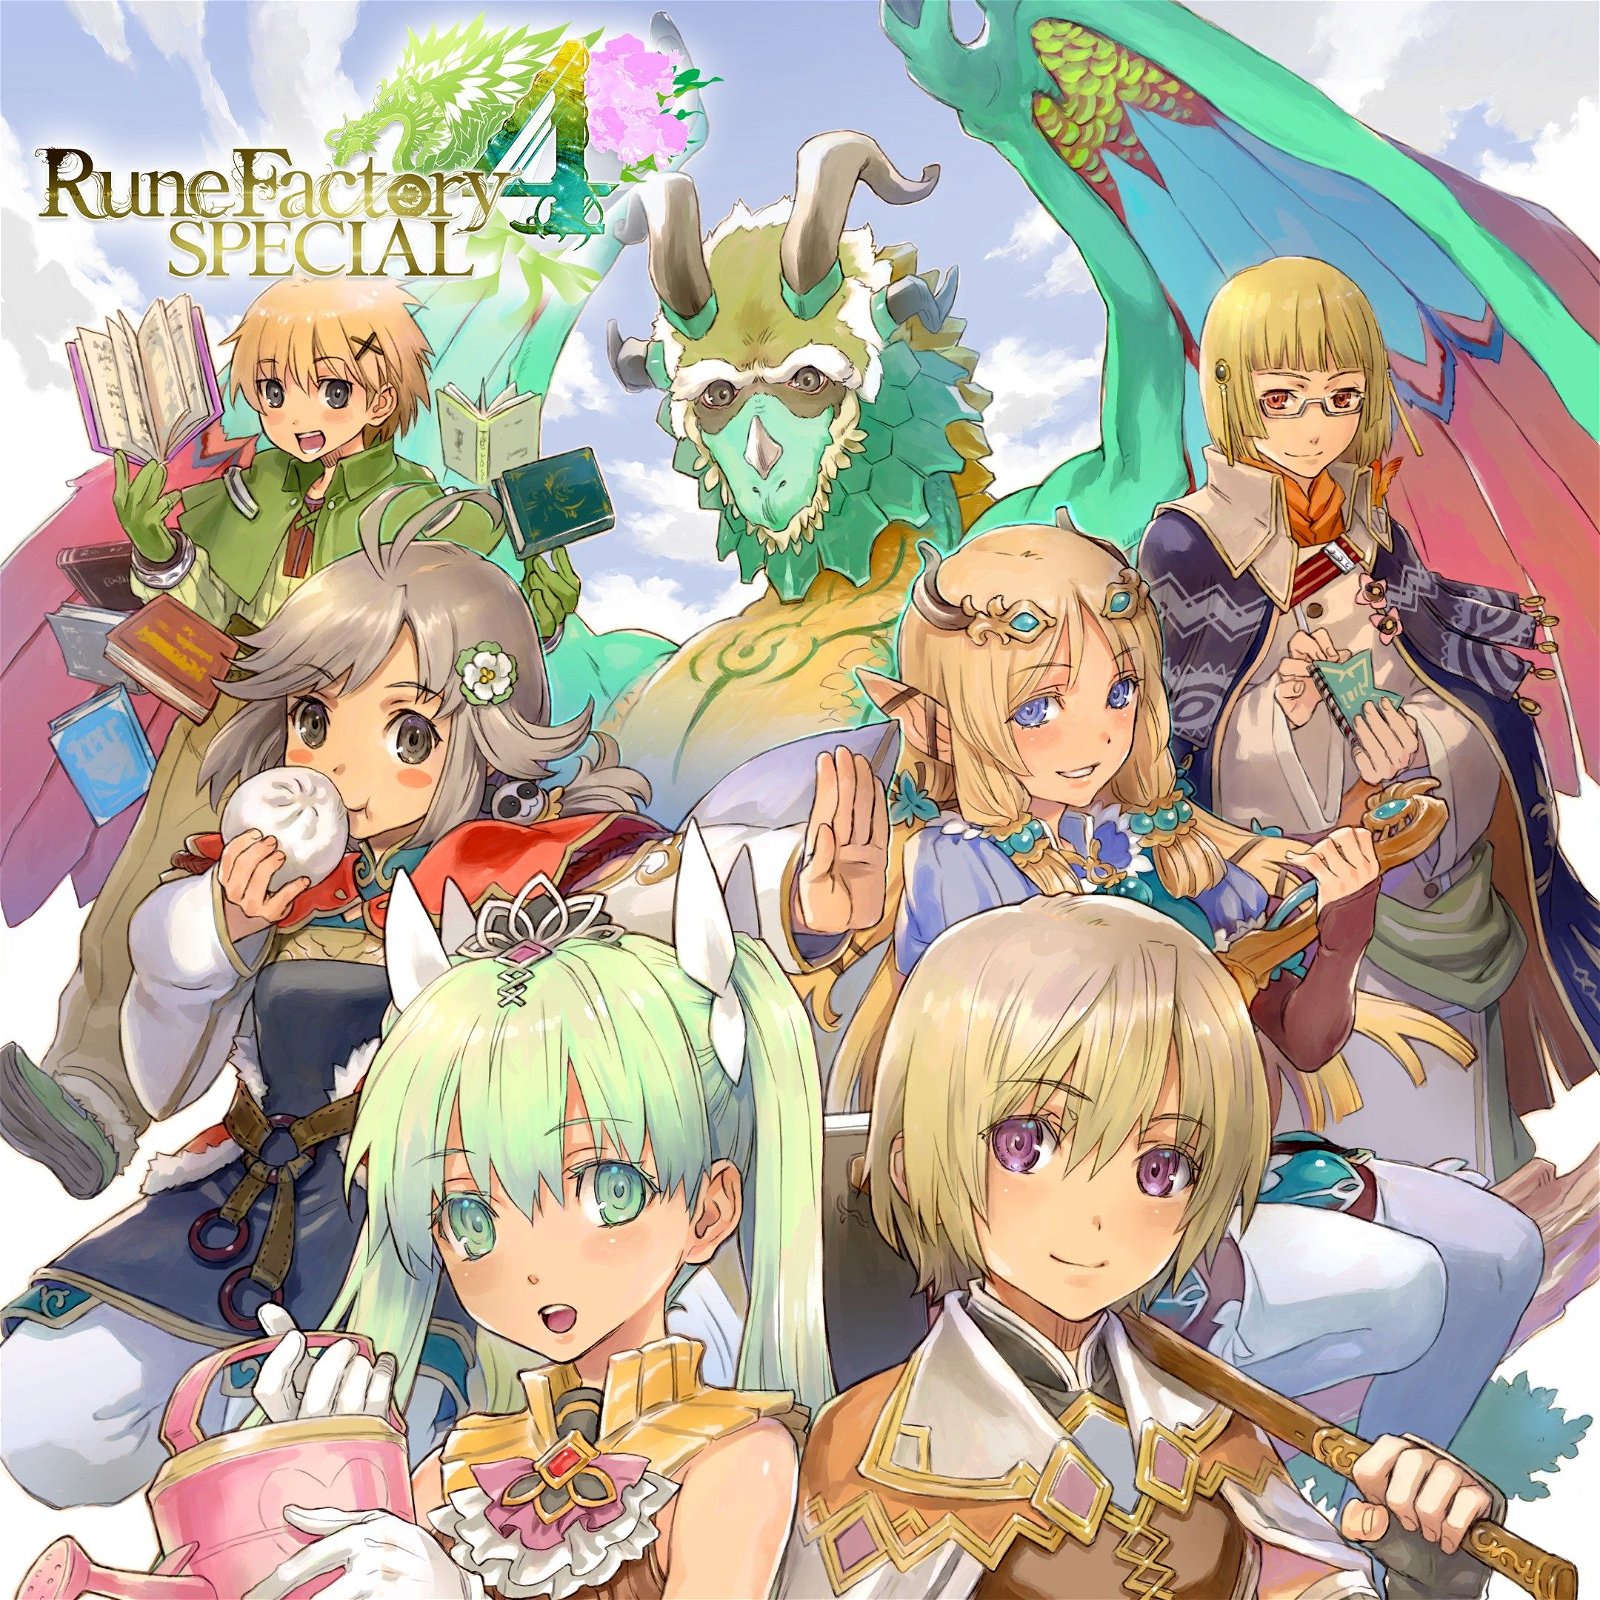 Image of Rune Factory 4 Special - Windows Edition